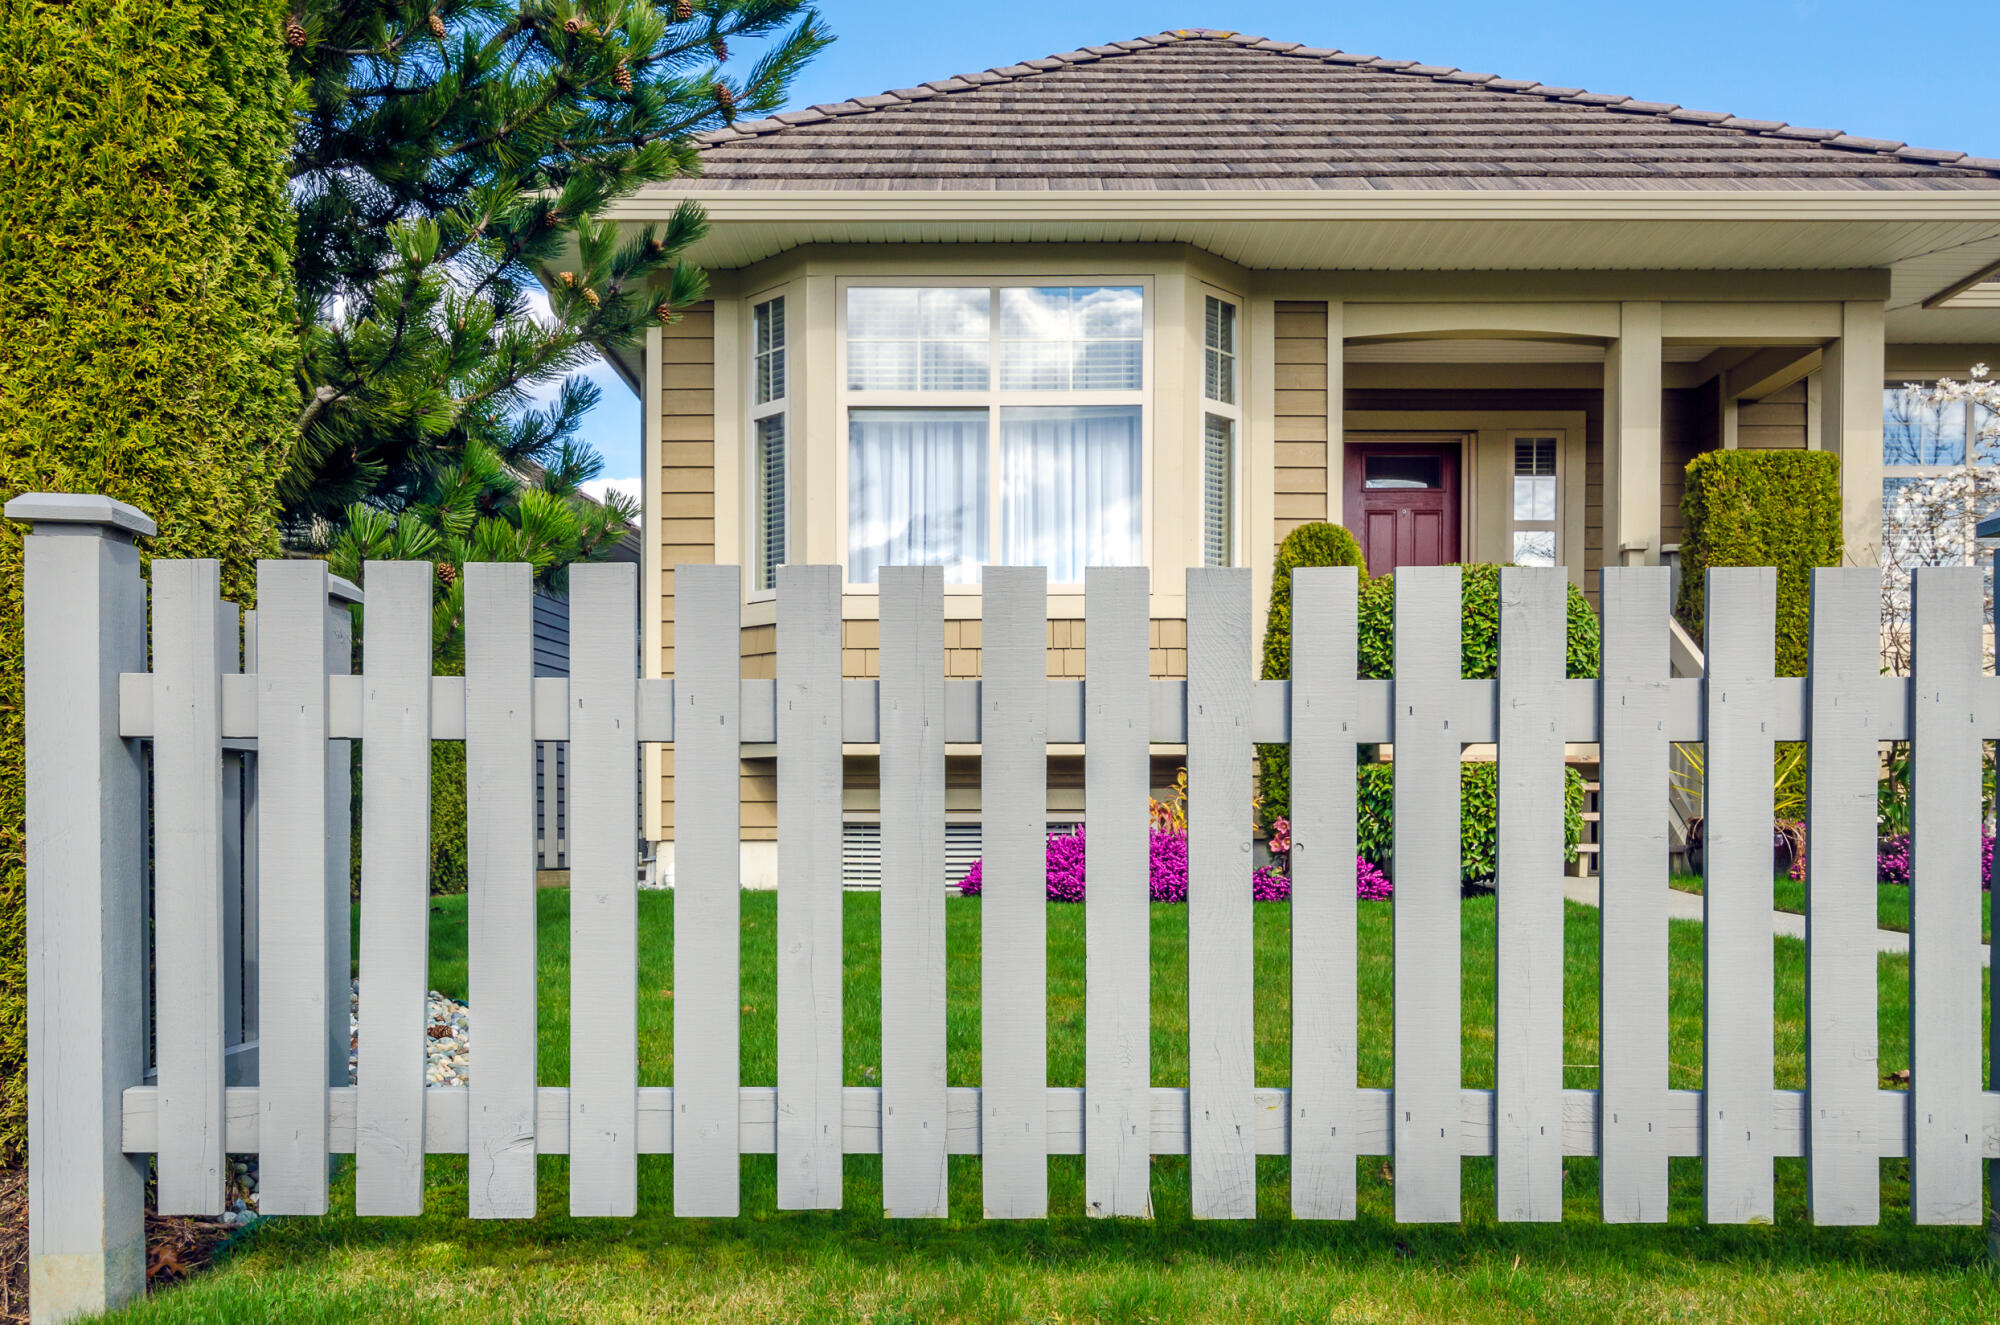 new gray picket fence outside of beautiful suburban home with landscaped lawn